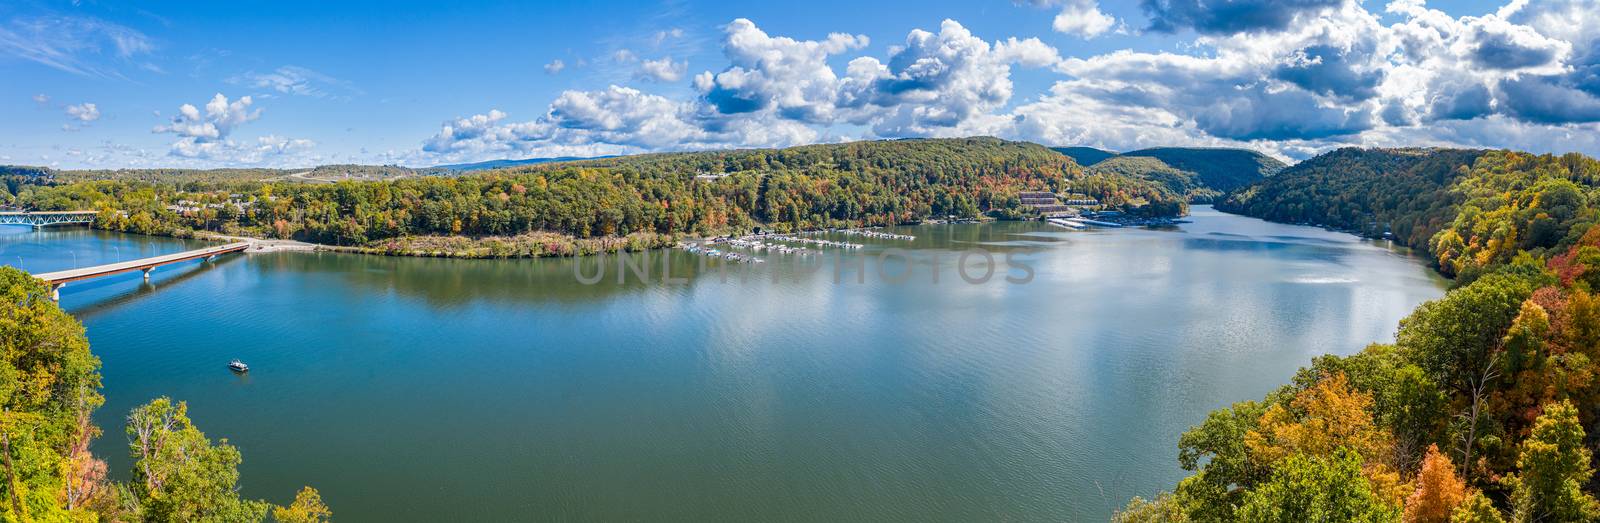 Aerial drone panorama of the autumn fall colors surrounding Cheat Lake near Morgantown, West Virginia